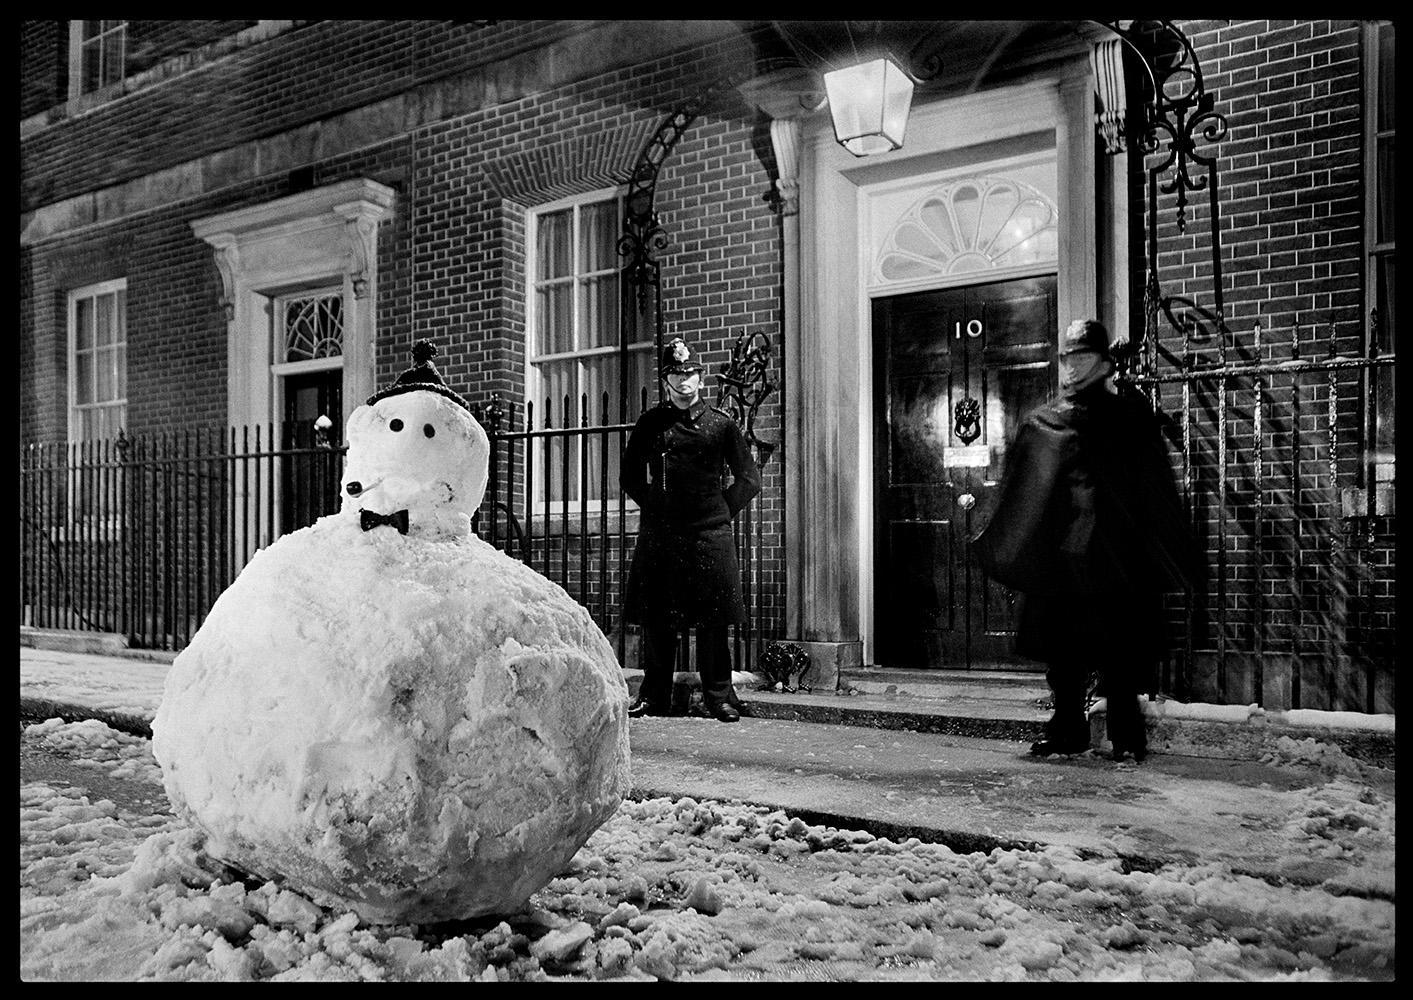 Visitor At No 10 Snowman 

By Arthur Steel 

Paper size: 54 x 41" / 137 x 104 cm

Silver Gelatin Print
1968 (printed later)
unframed
hand signed
edition of 20

note other print sizes and framing options are available, please enquire for